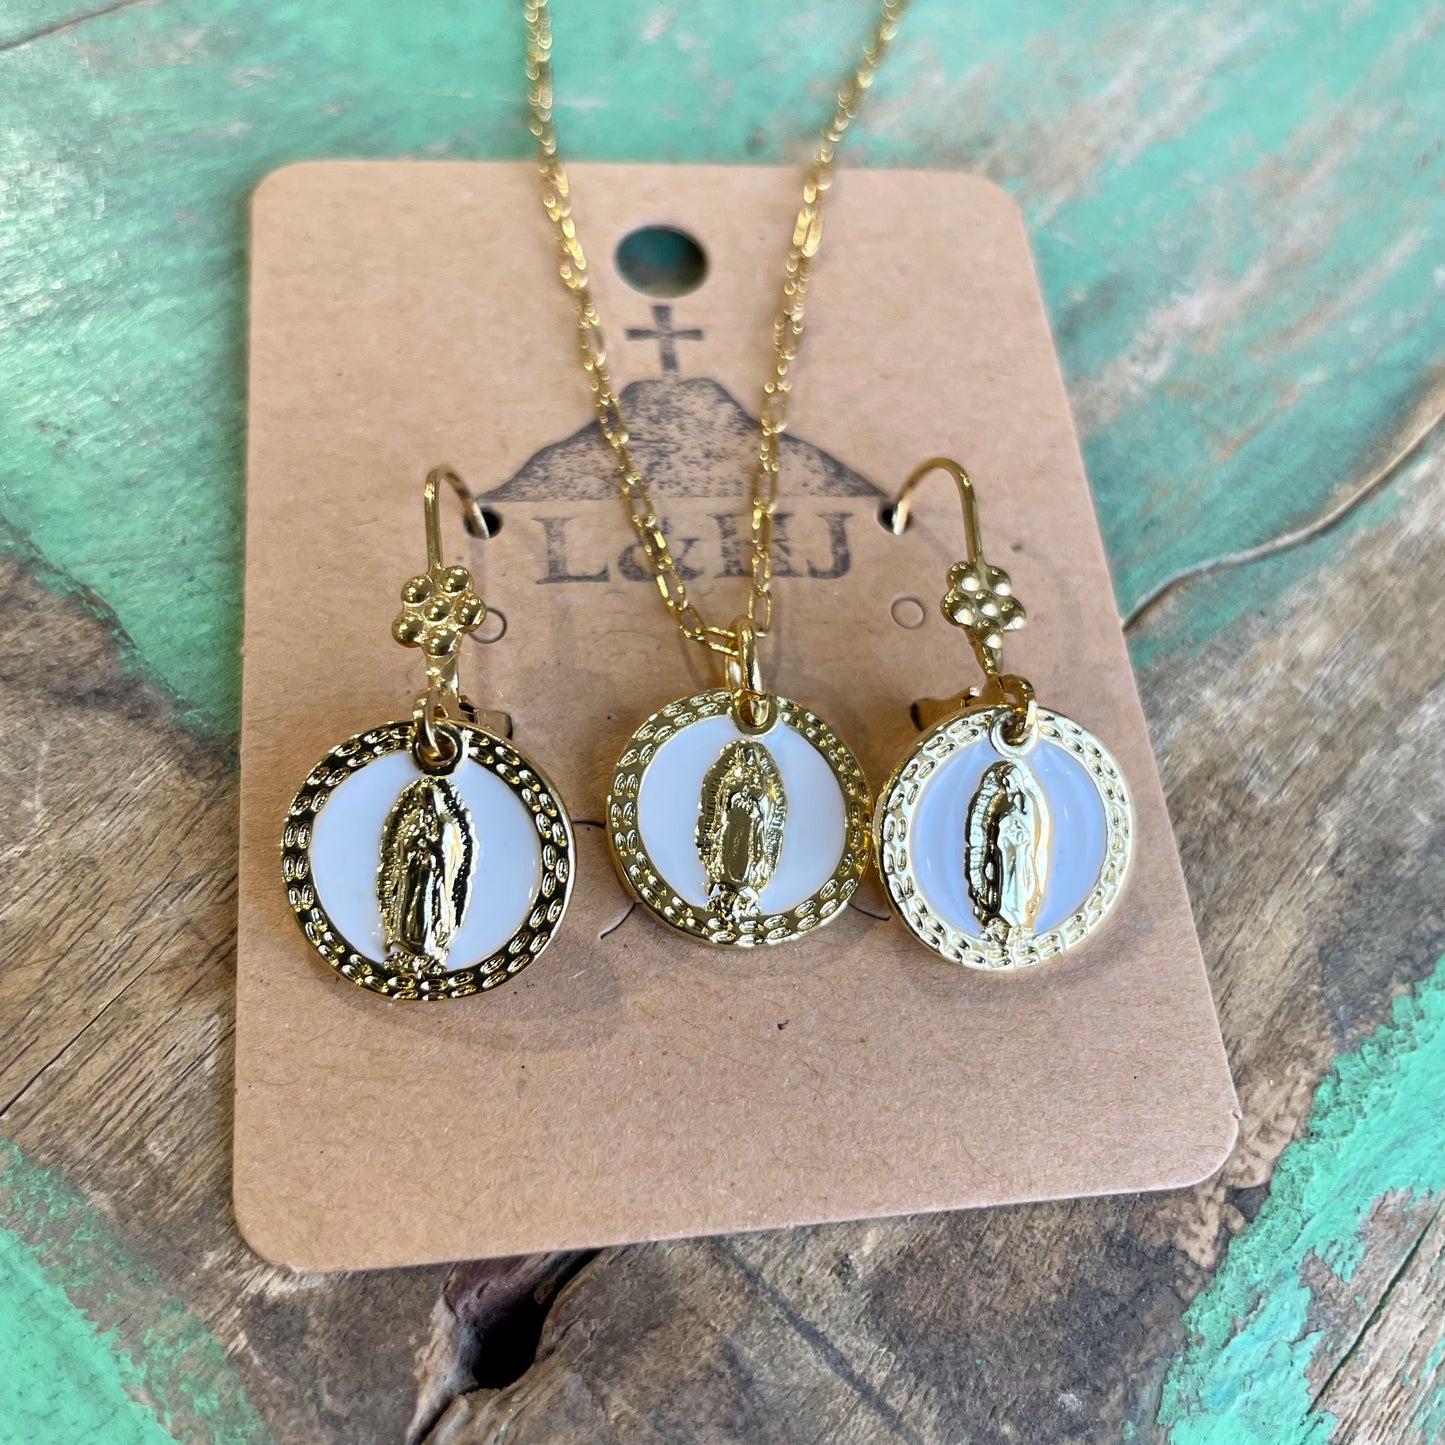 White OLG Necklace and Earrings